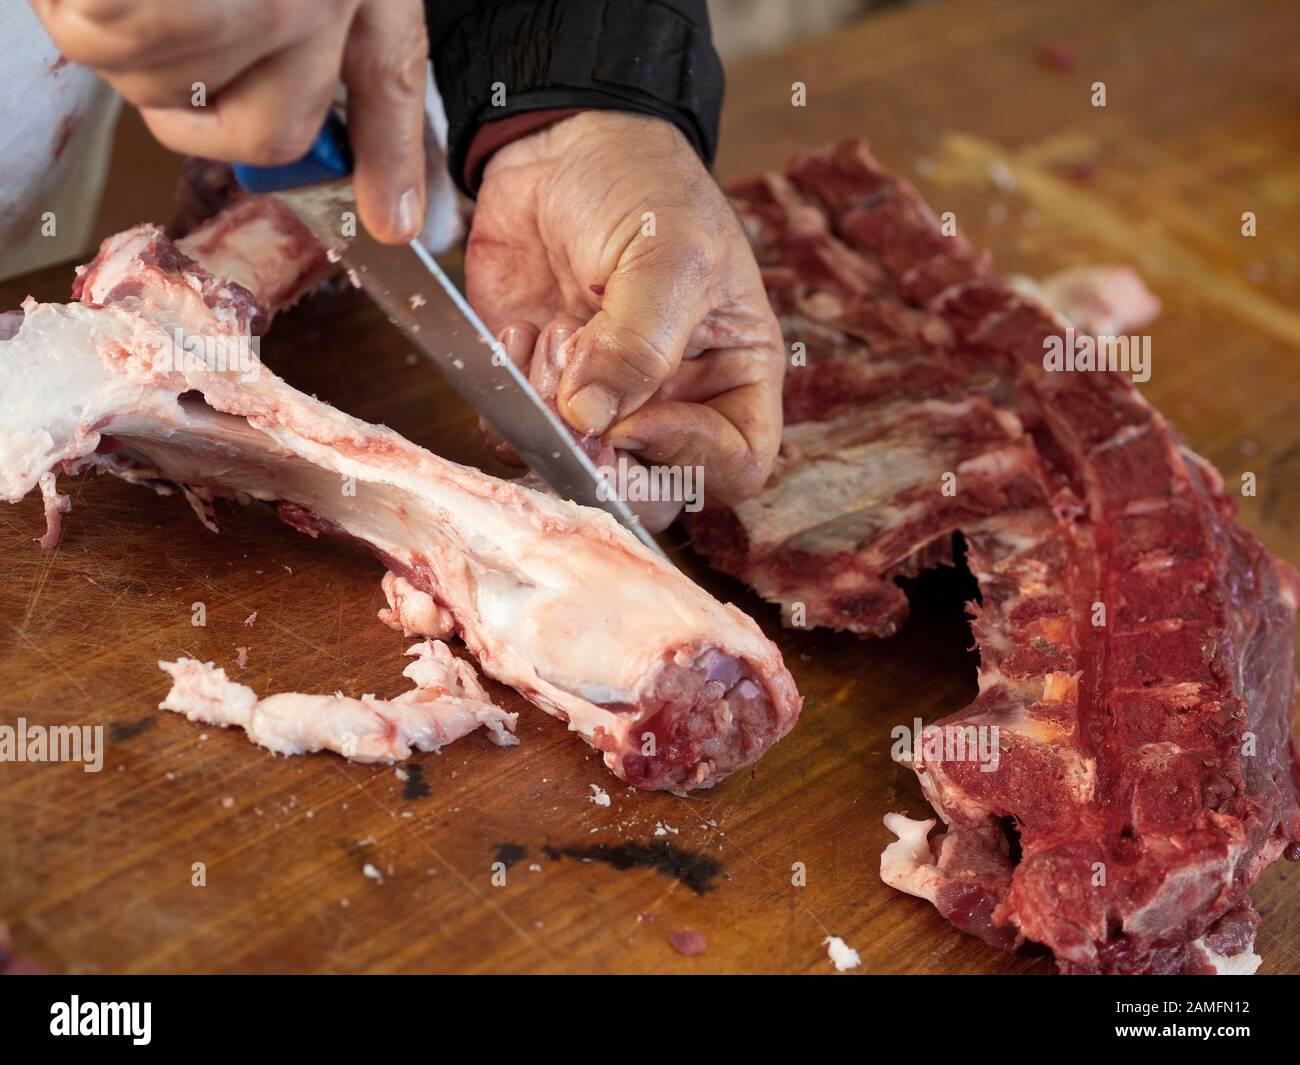 Pork butchery, traditional rustic style. Removing as much meat as possible from bones, avoiding waste. Stock Photo